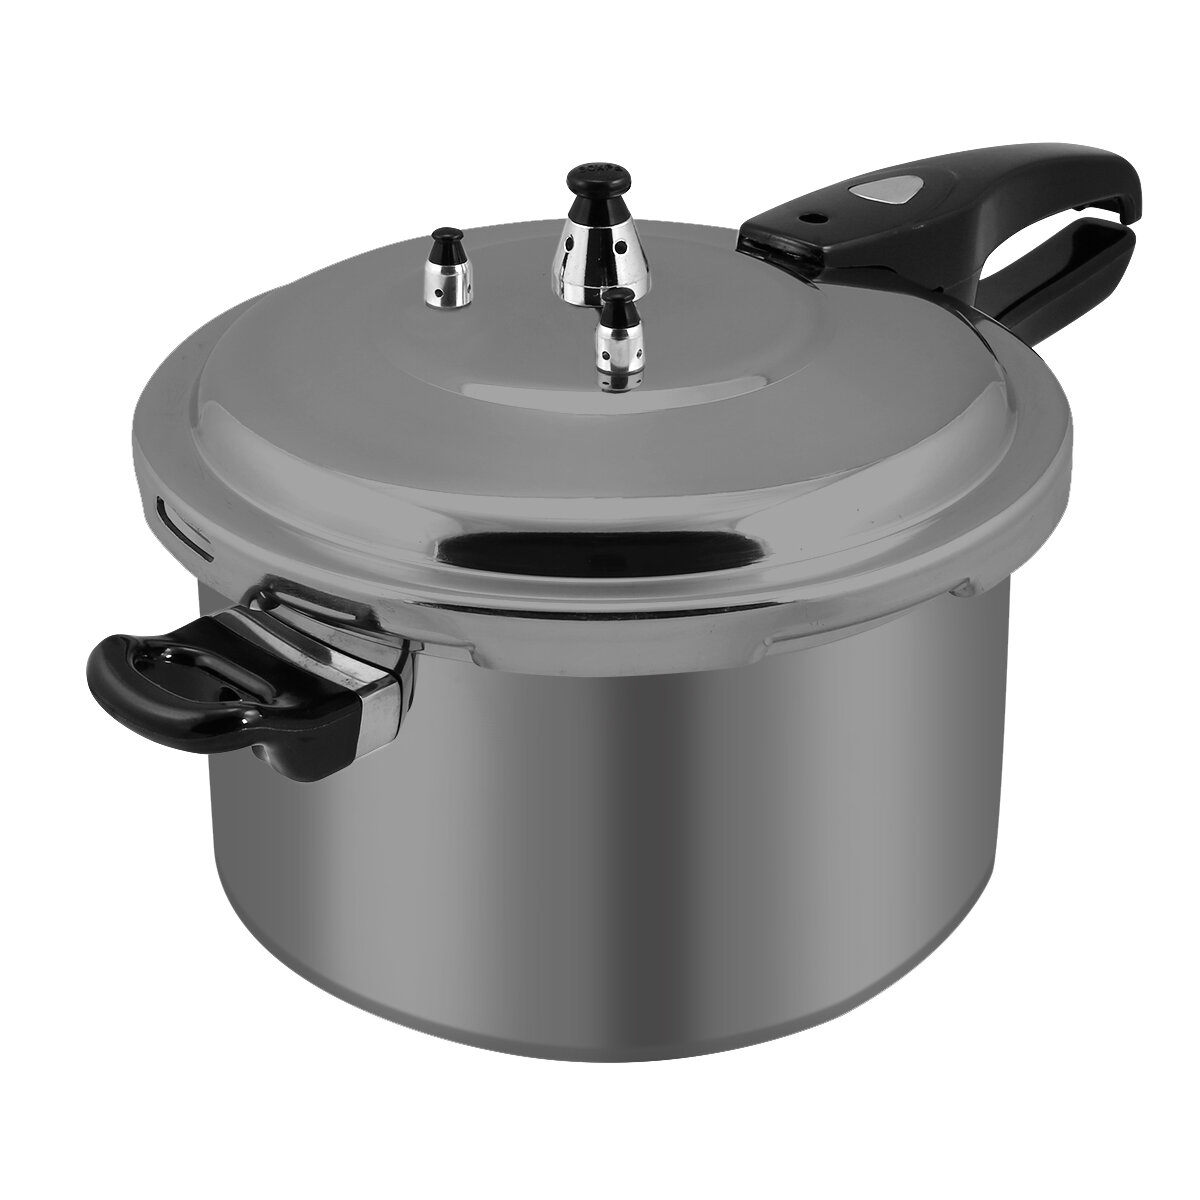 Barton Holiday Home 6 Qt. Stovetop Pressure Cooker & Reviews